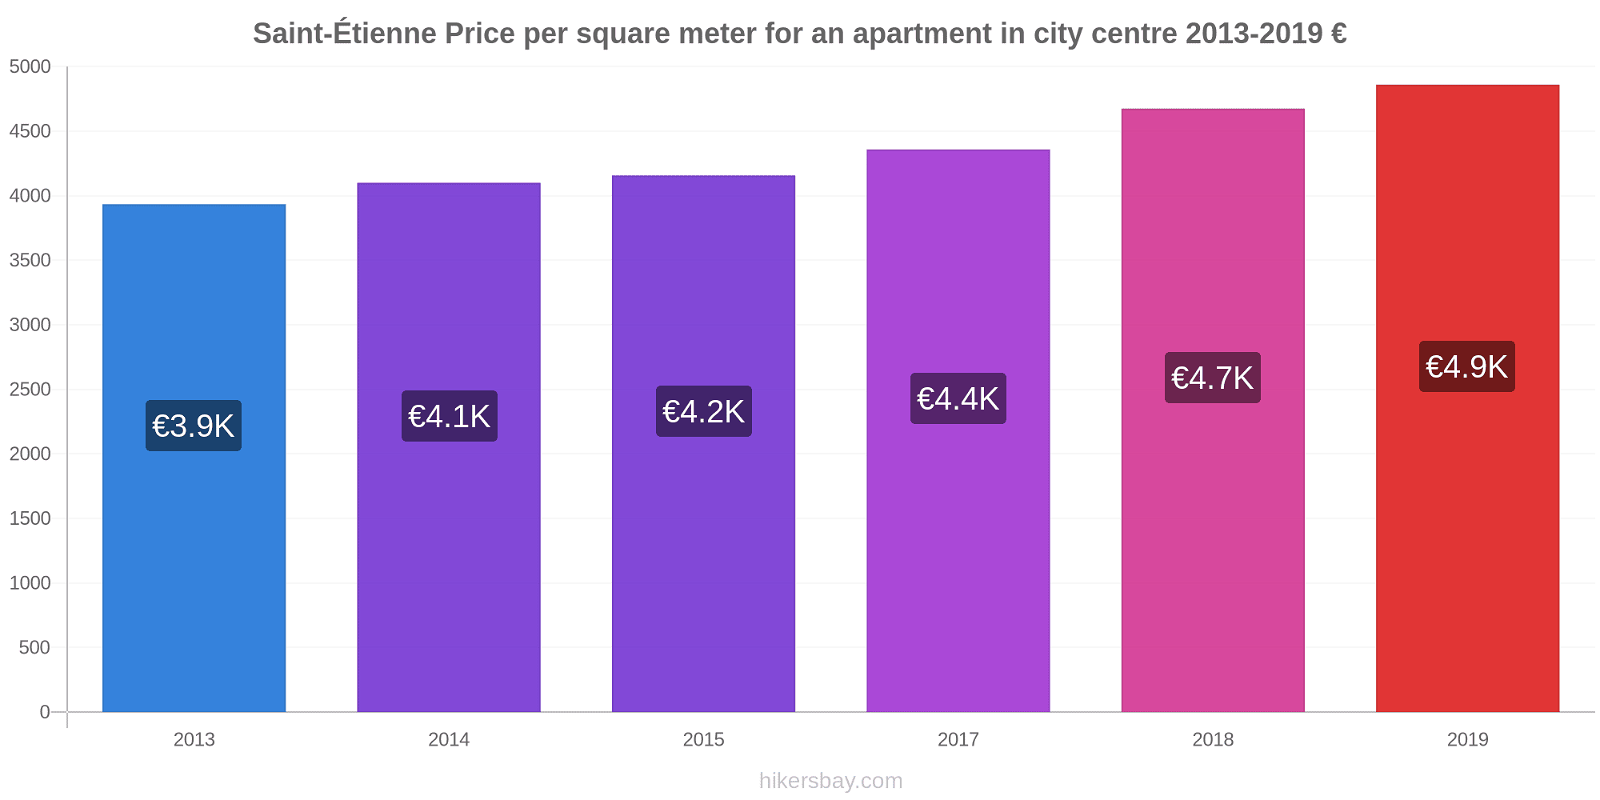 Saint-Étienne price changes Price per square meter for an apartment in city centre hikersbay.com